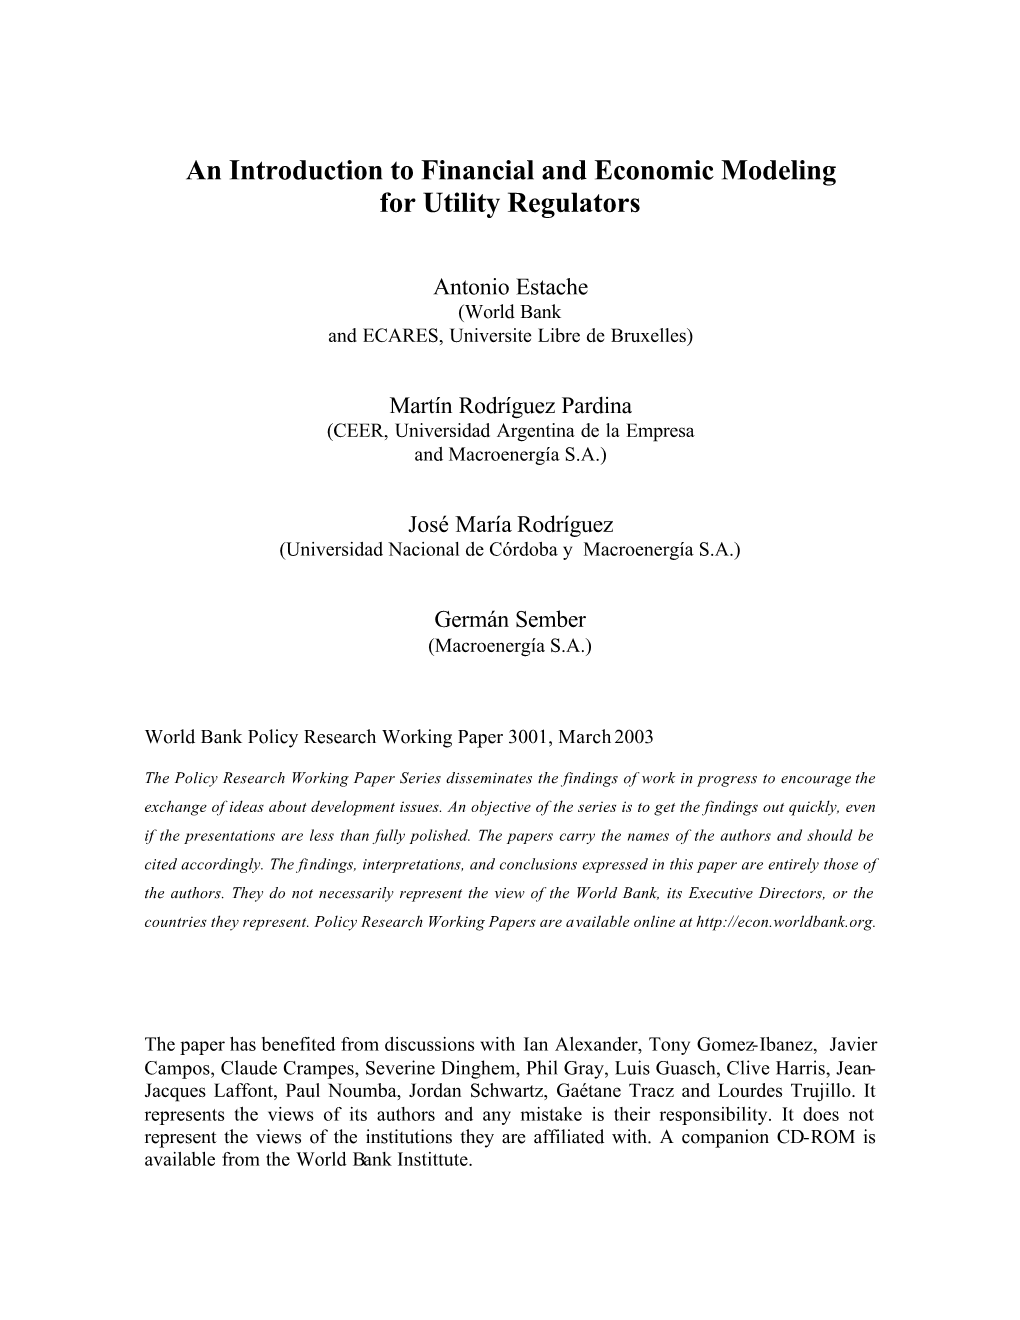 An Introduction to Financial and Economic Modeling for Utility Regulators